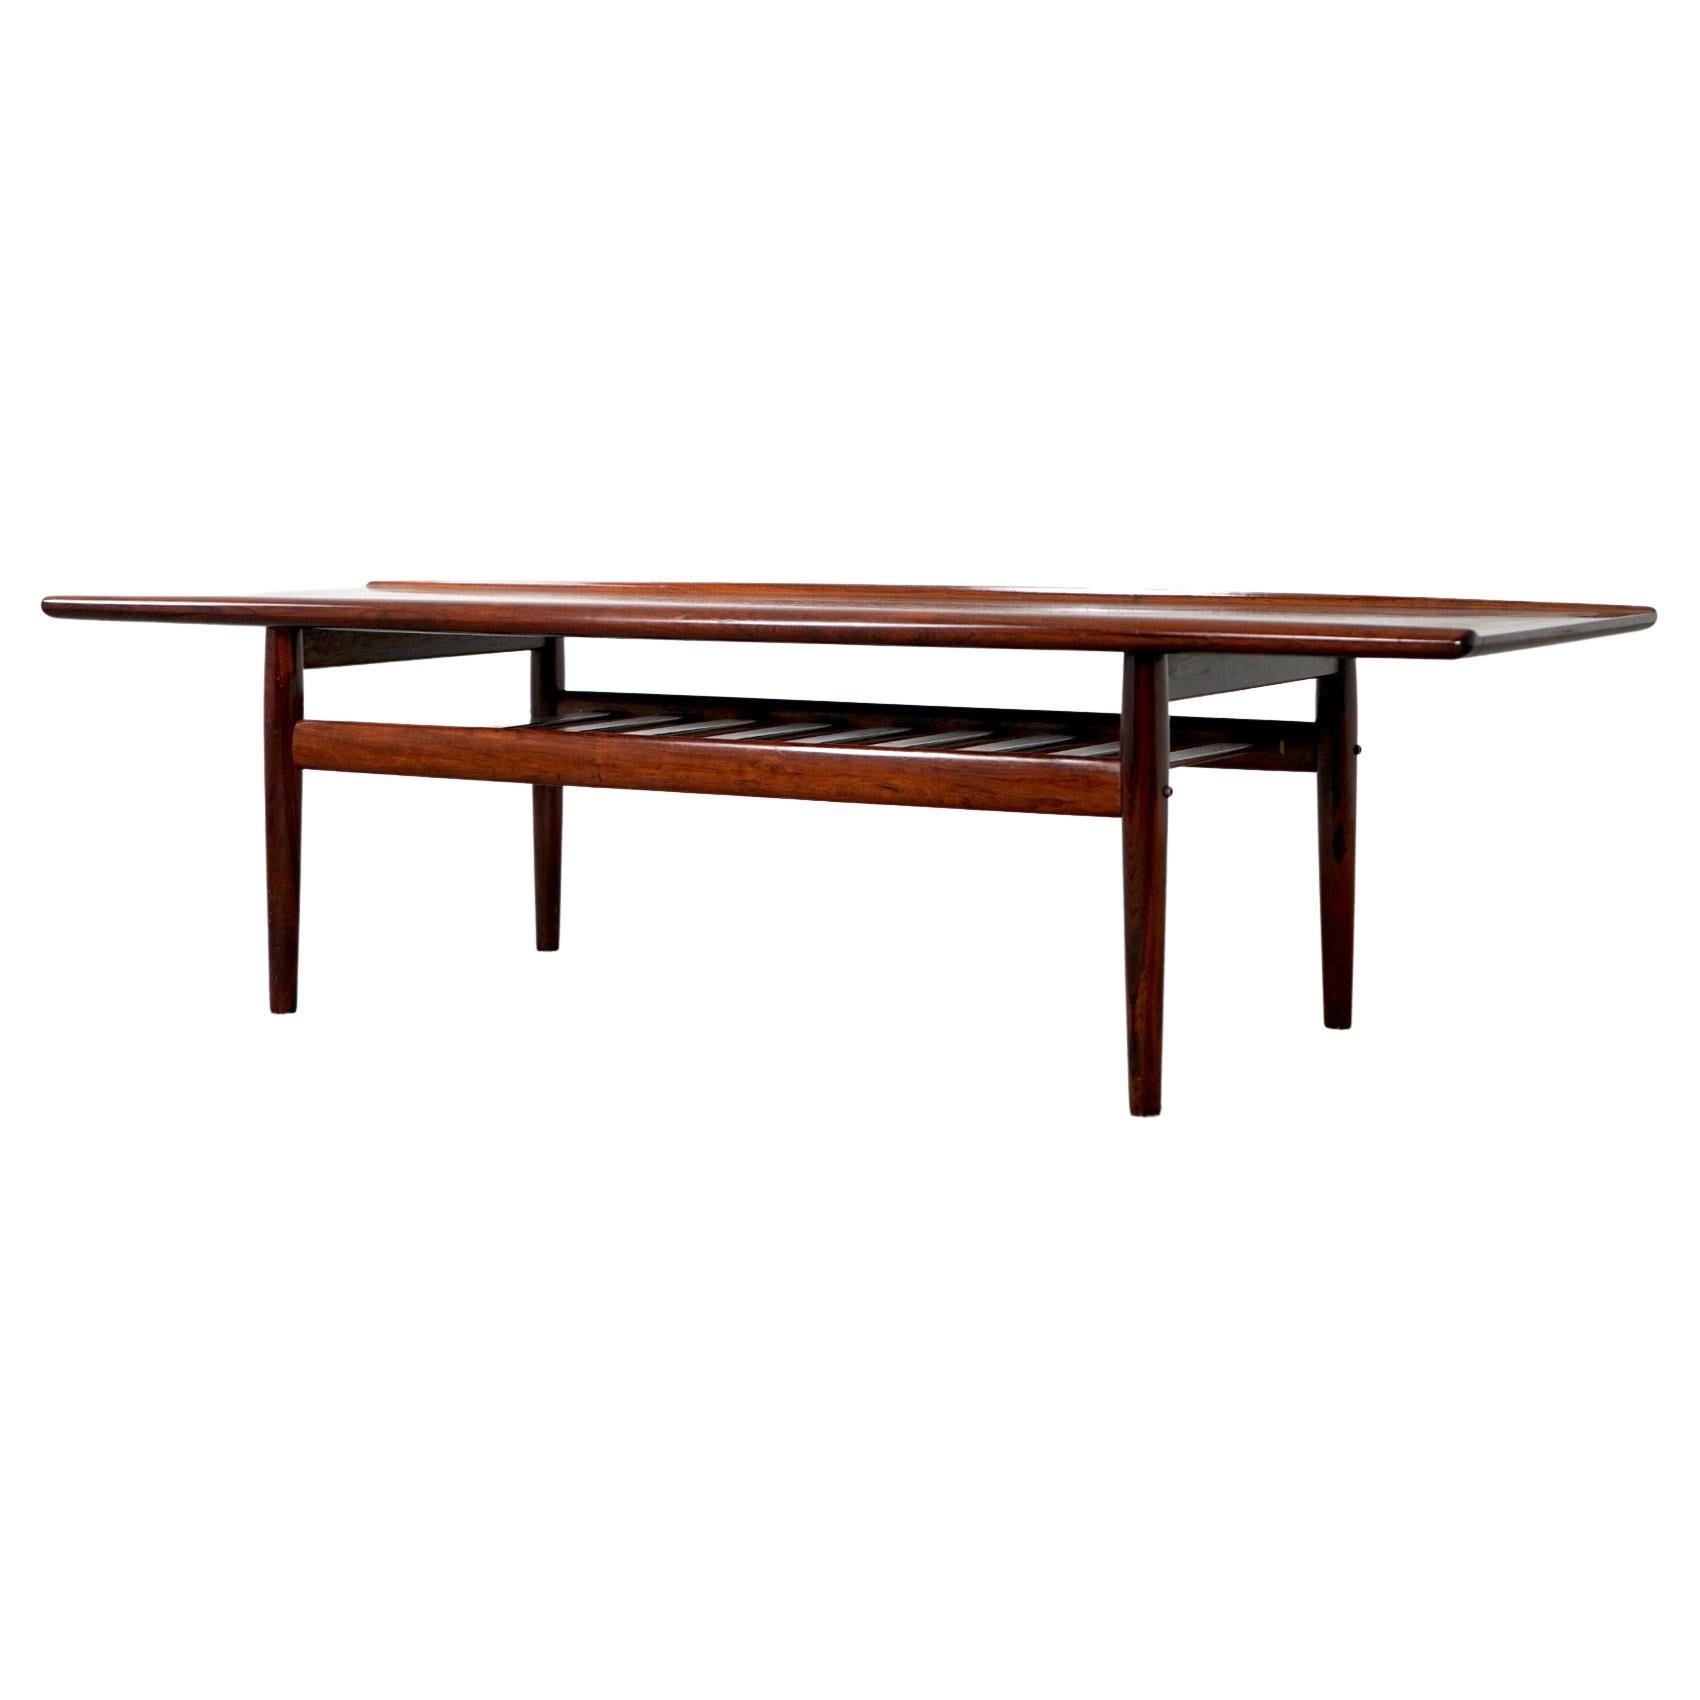 Rosewood Danish coffee table by Grete Jalk, circa 1960's. Top shows stunning book matched veneer and solid wood curved edge along its length. Slatted shelf gives an airy impression and is perfect for magazines, remote controls and other things that